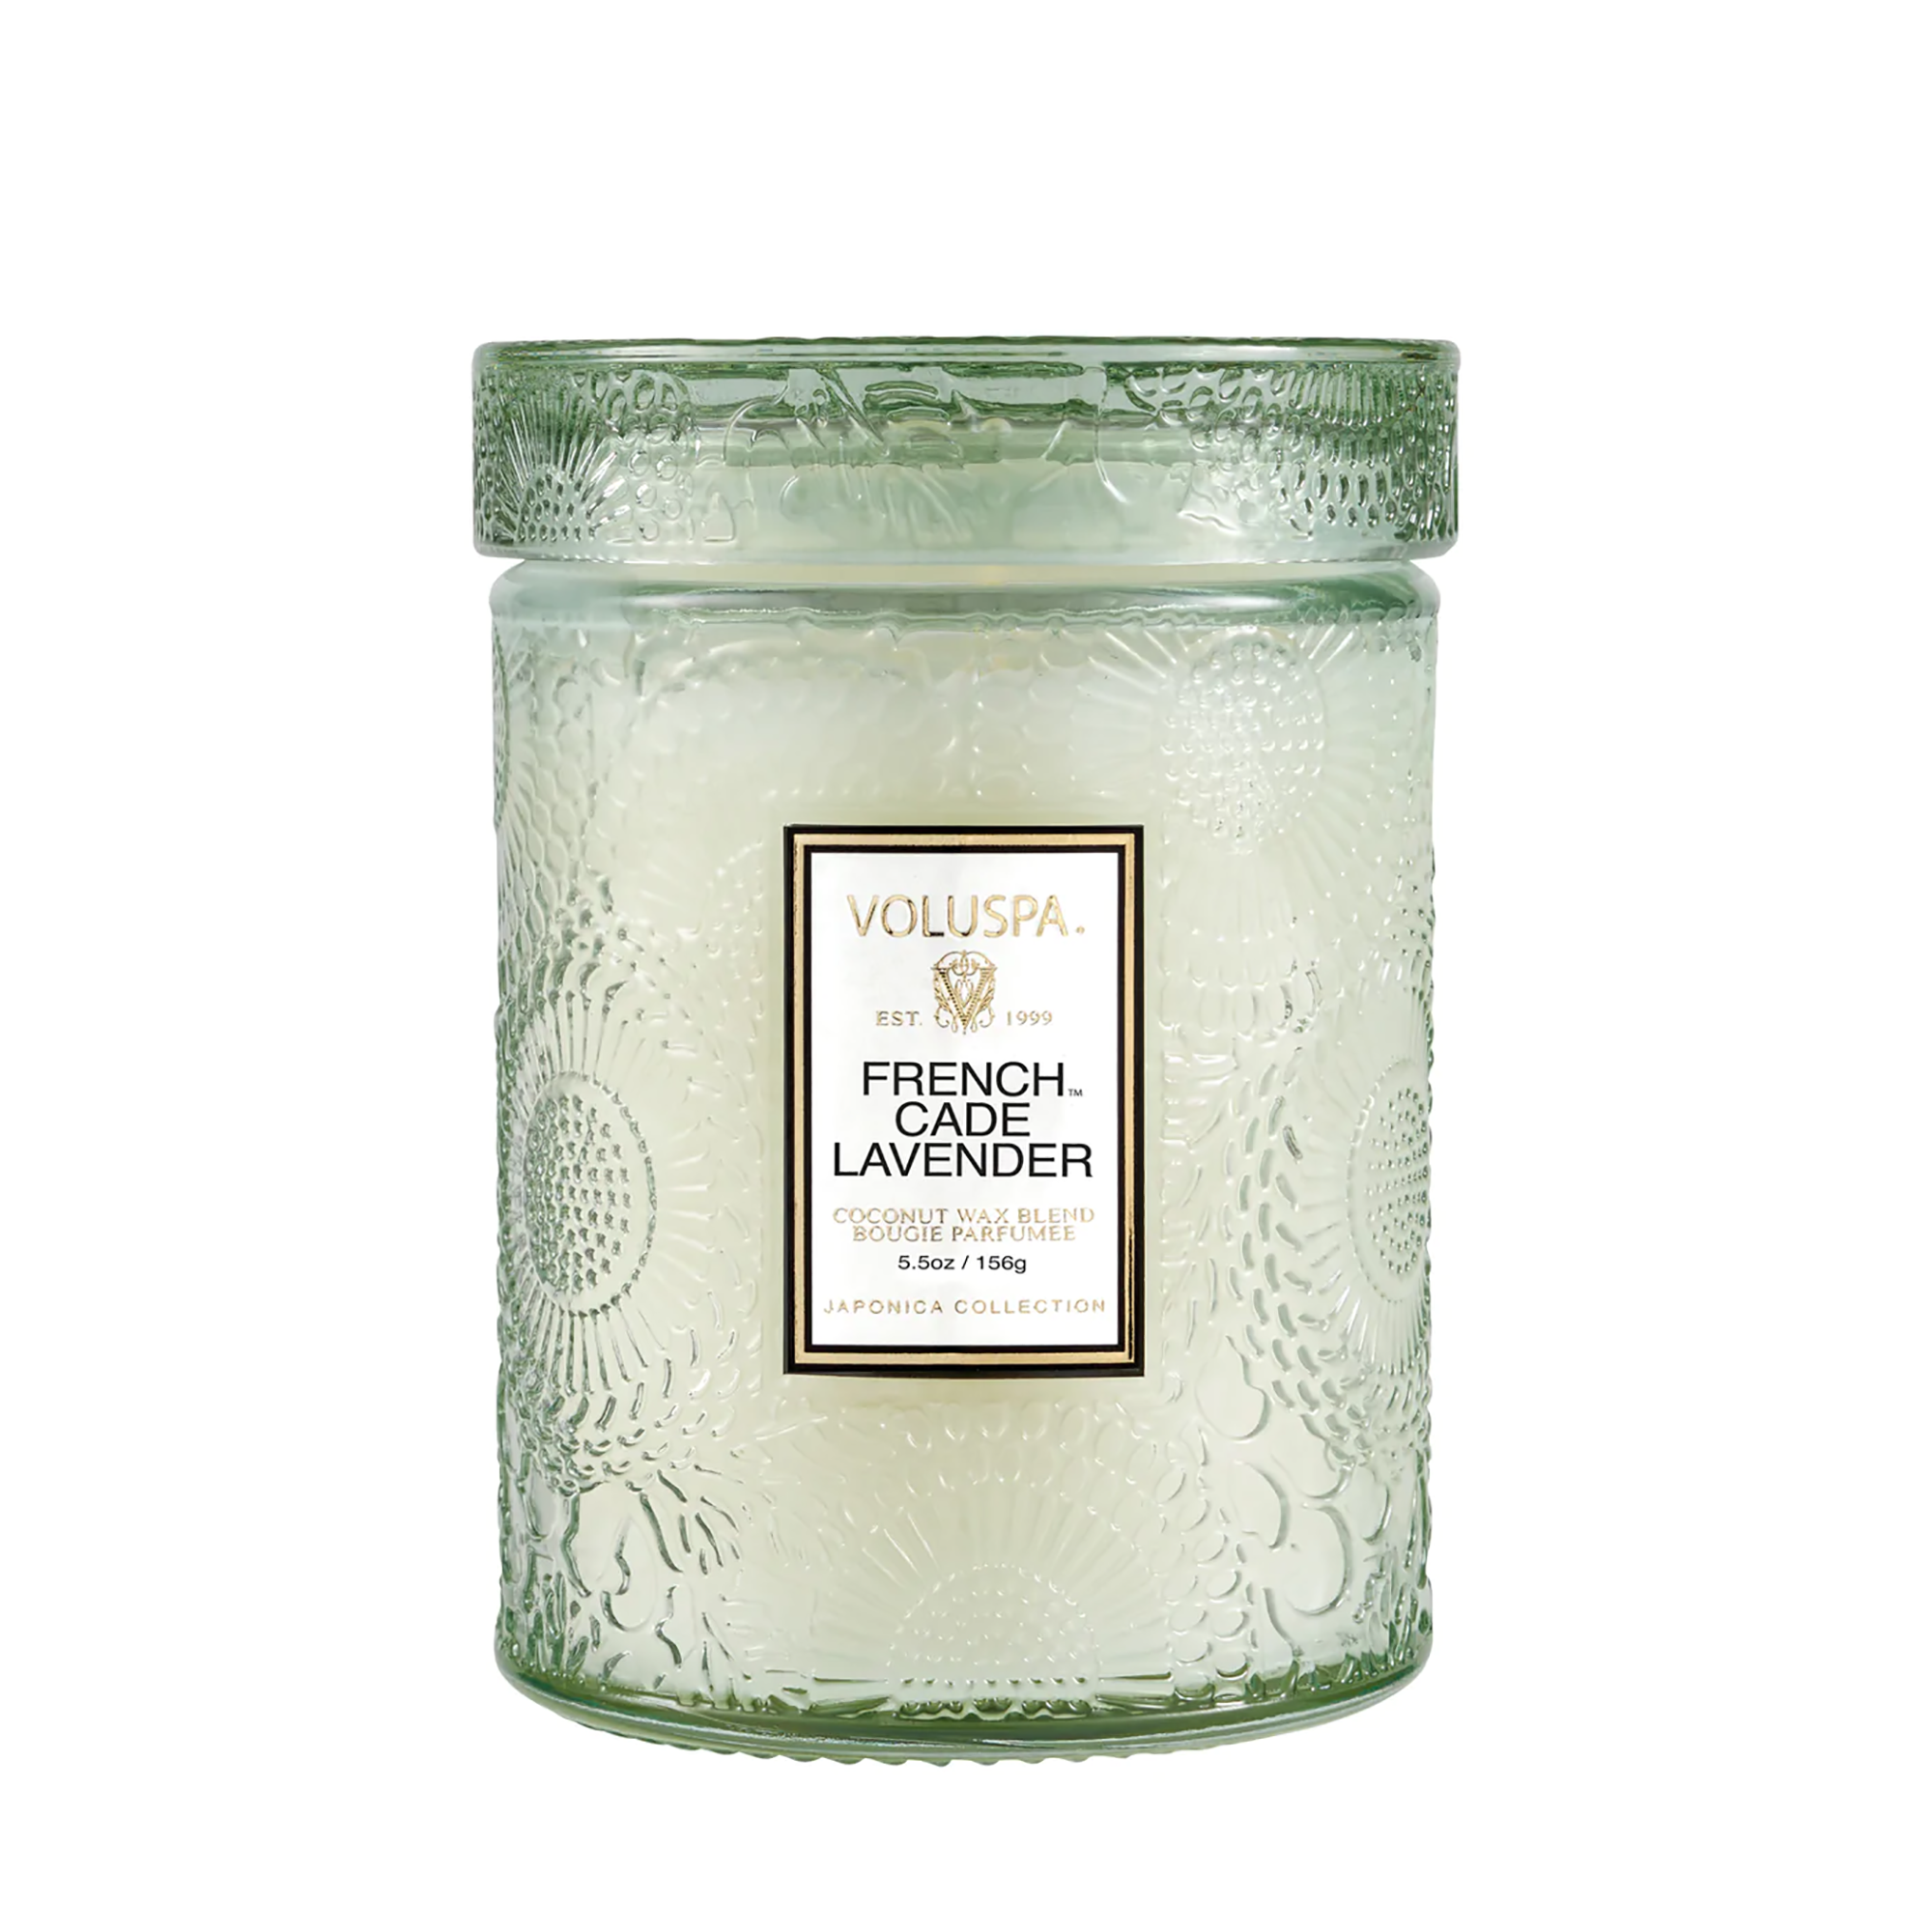  Voluspa Small Jar Candle / French Cade and Lavender